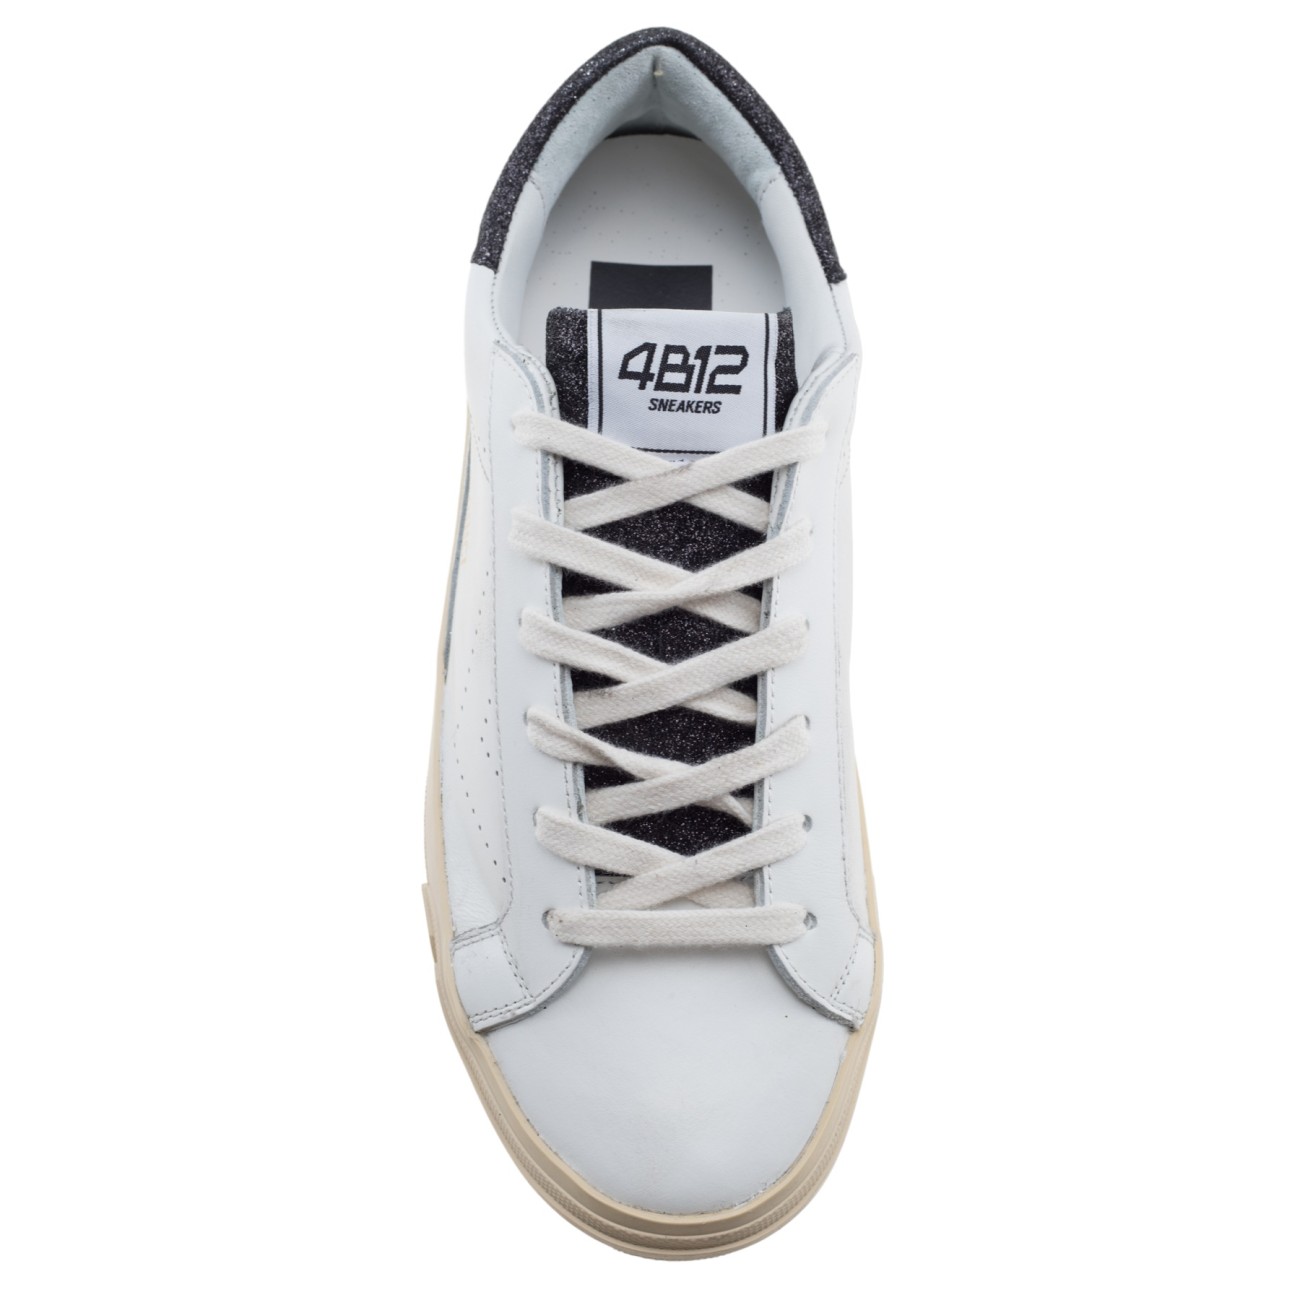 4B12 sneakers basse donna...